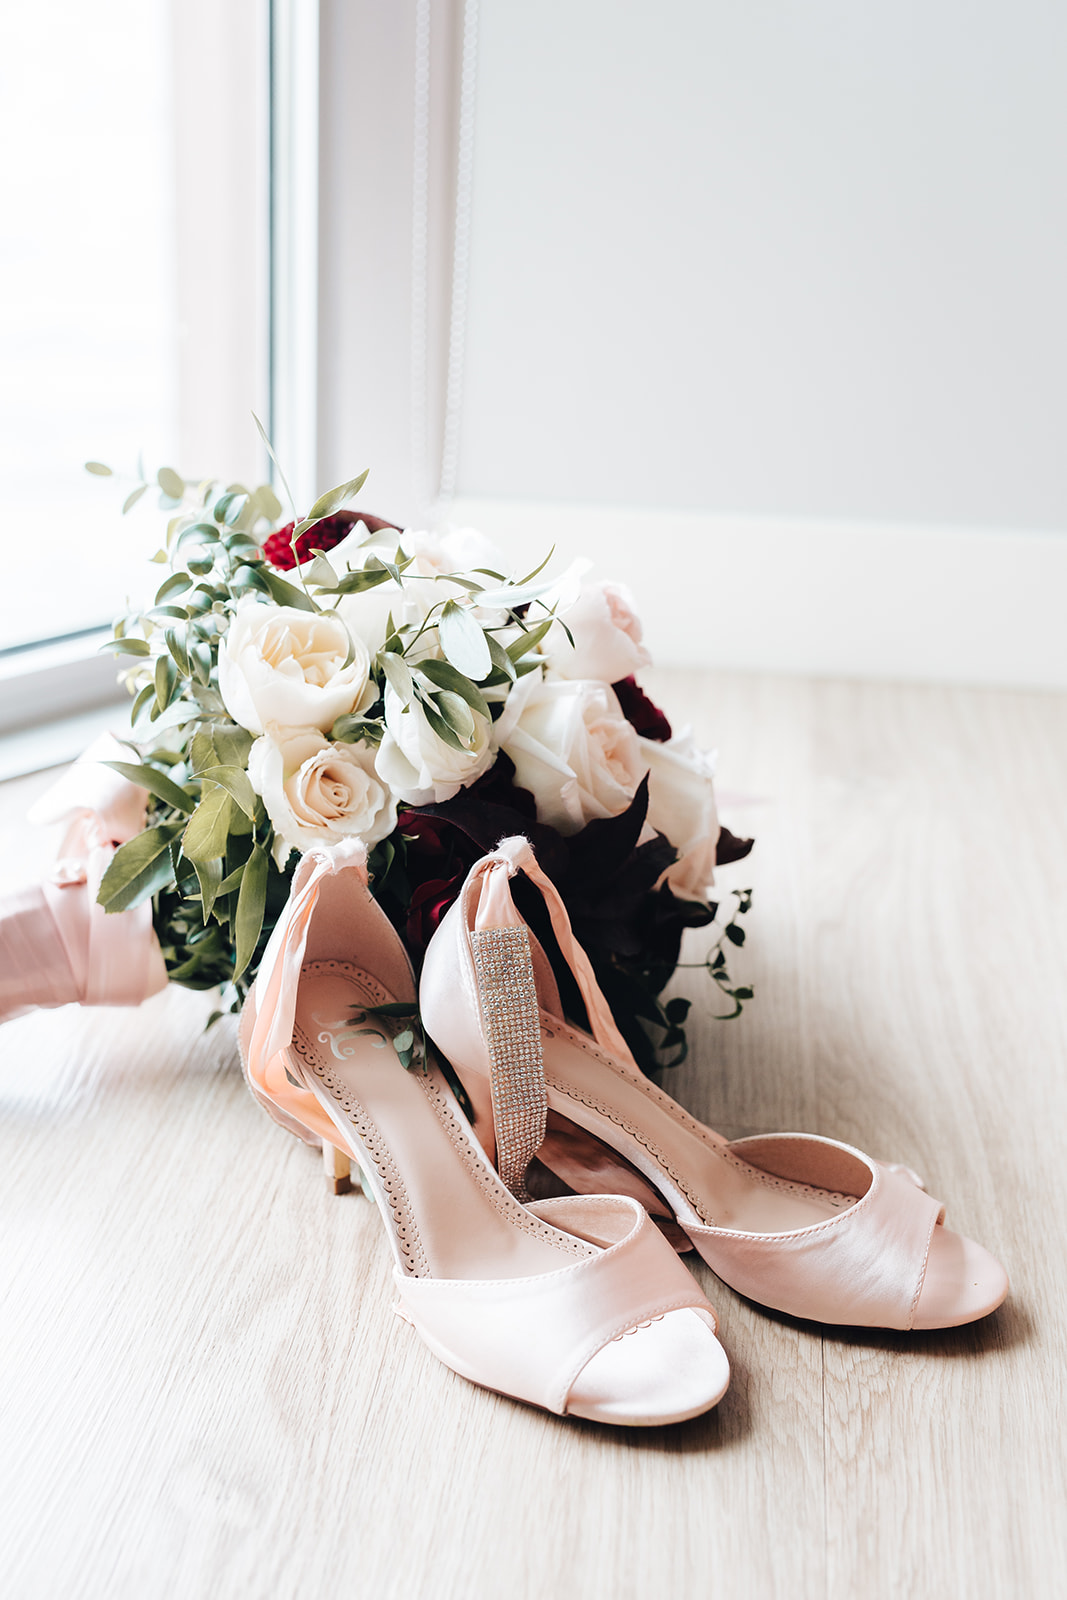 Bride's shoes and bouquet for West Bay Beach wedding